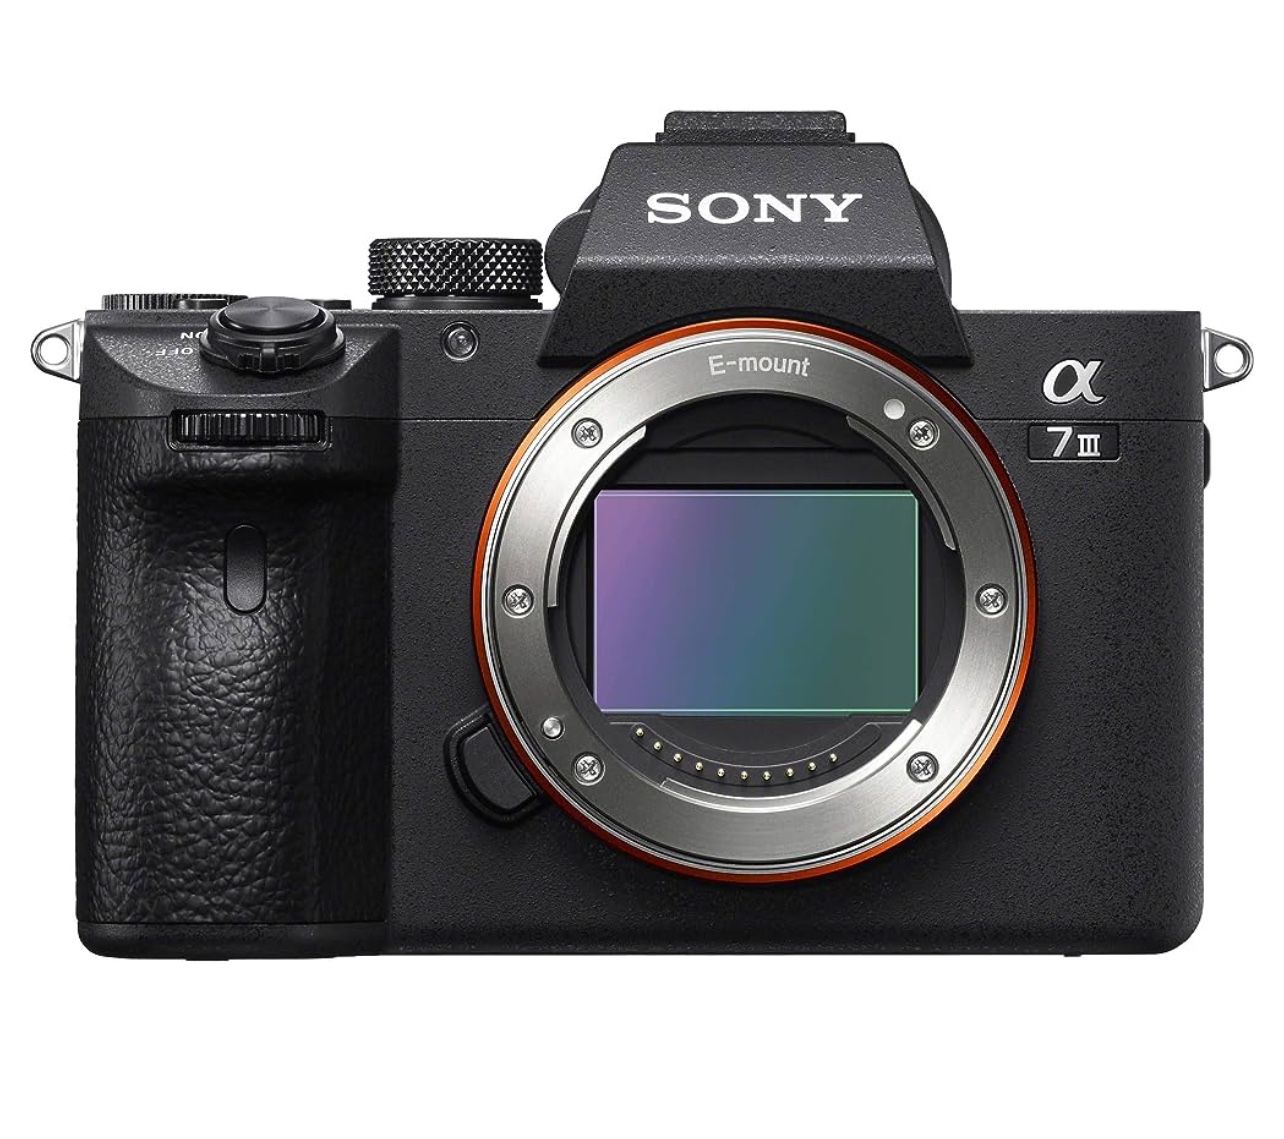 Sony A7iii Camera + 4 128GB SD Cards + Front Cap